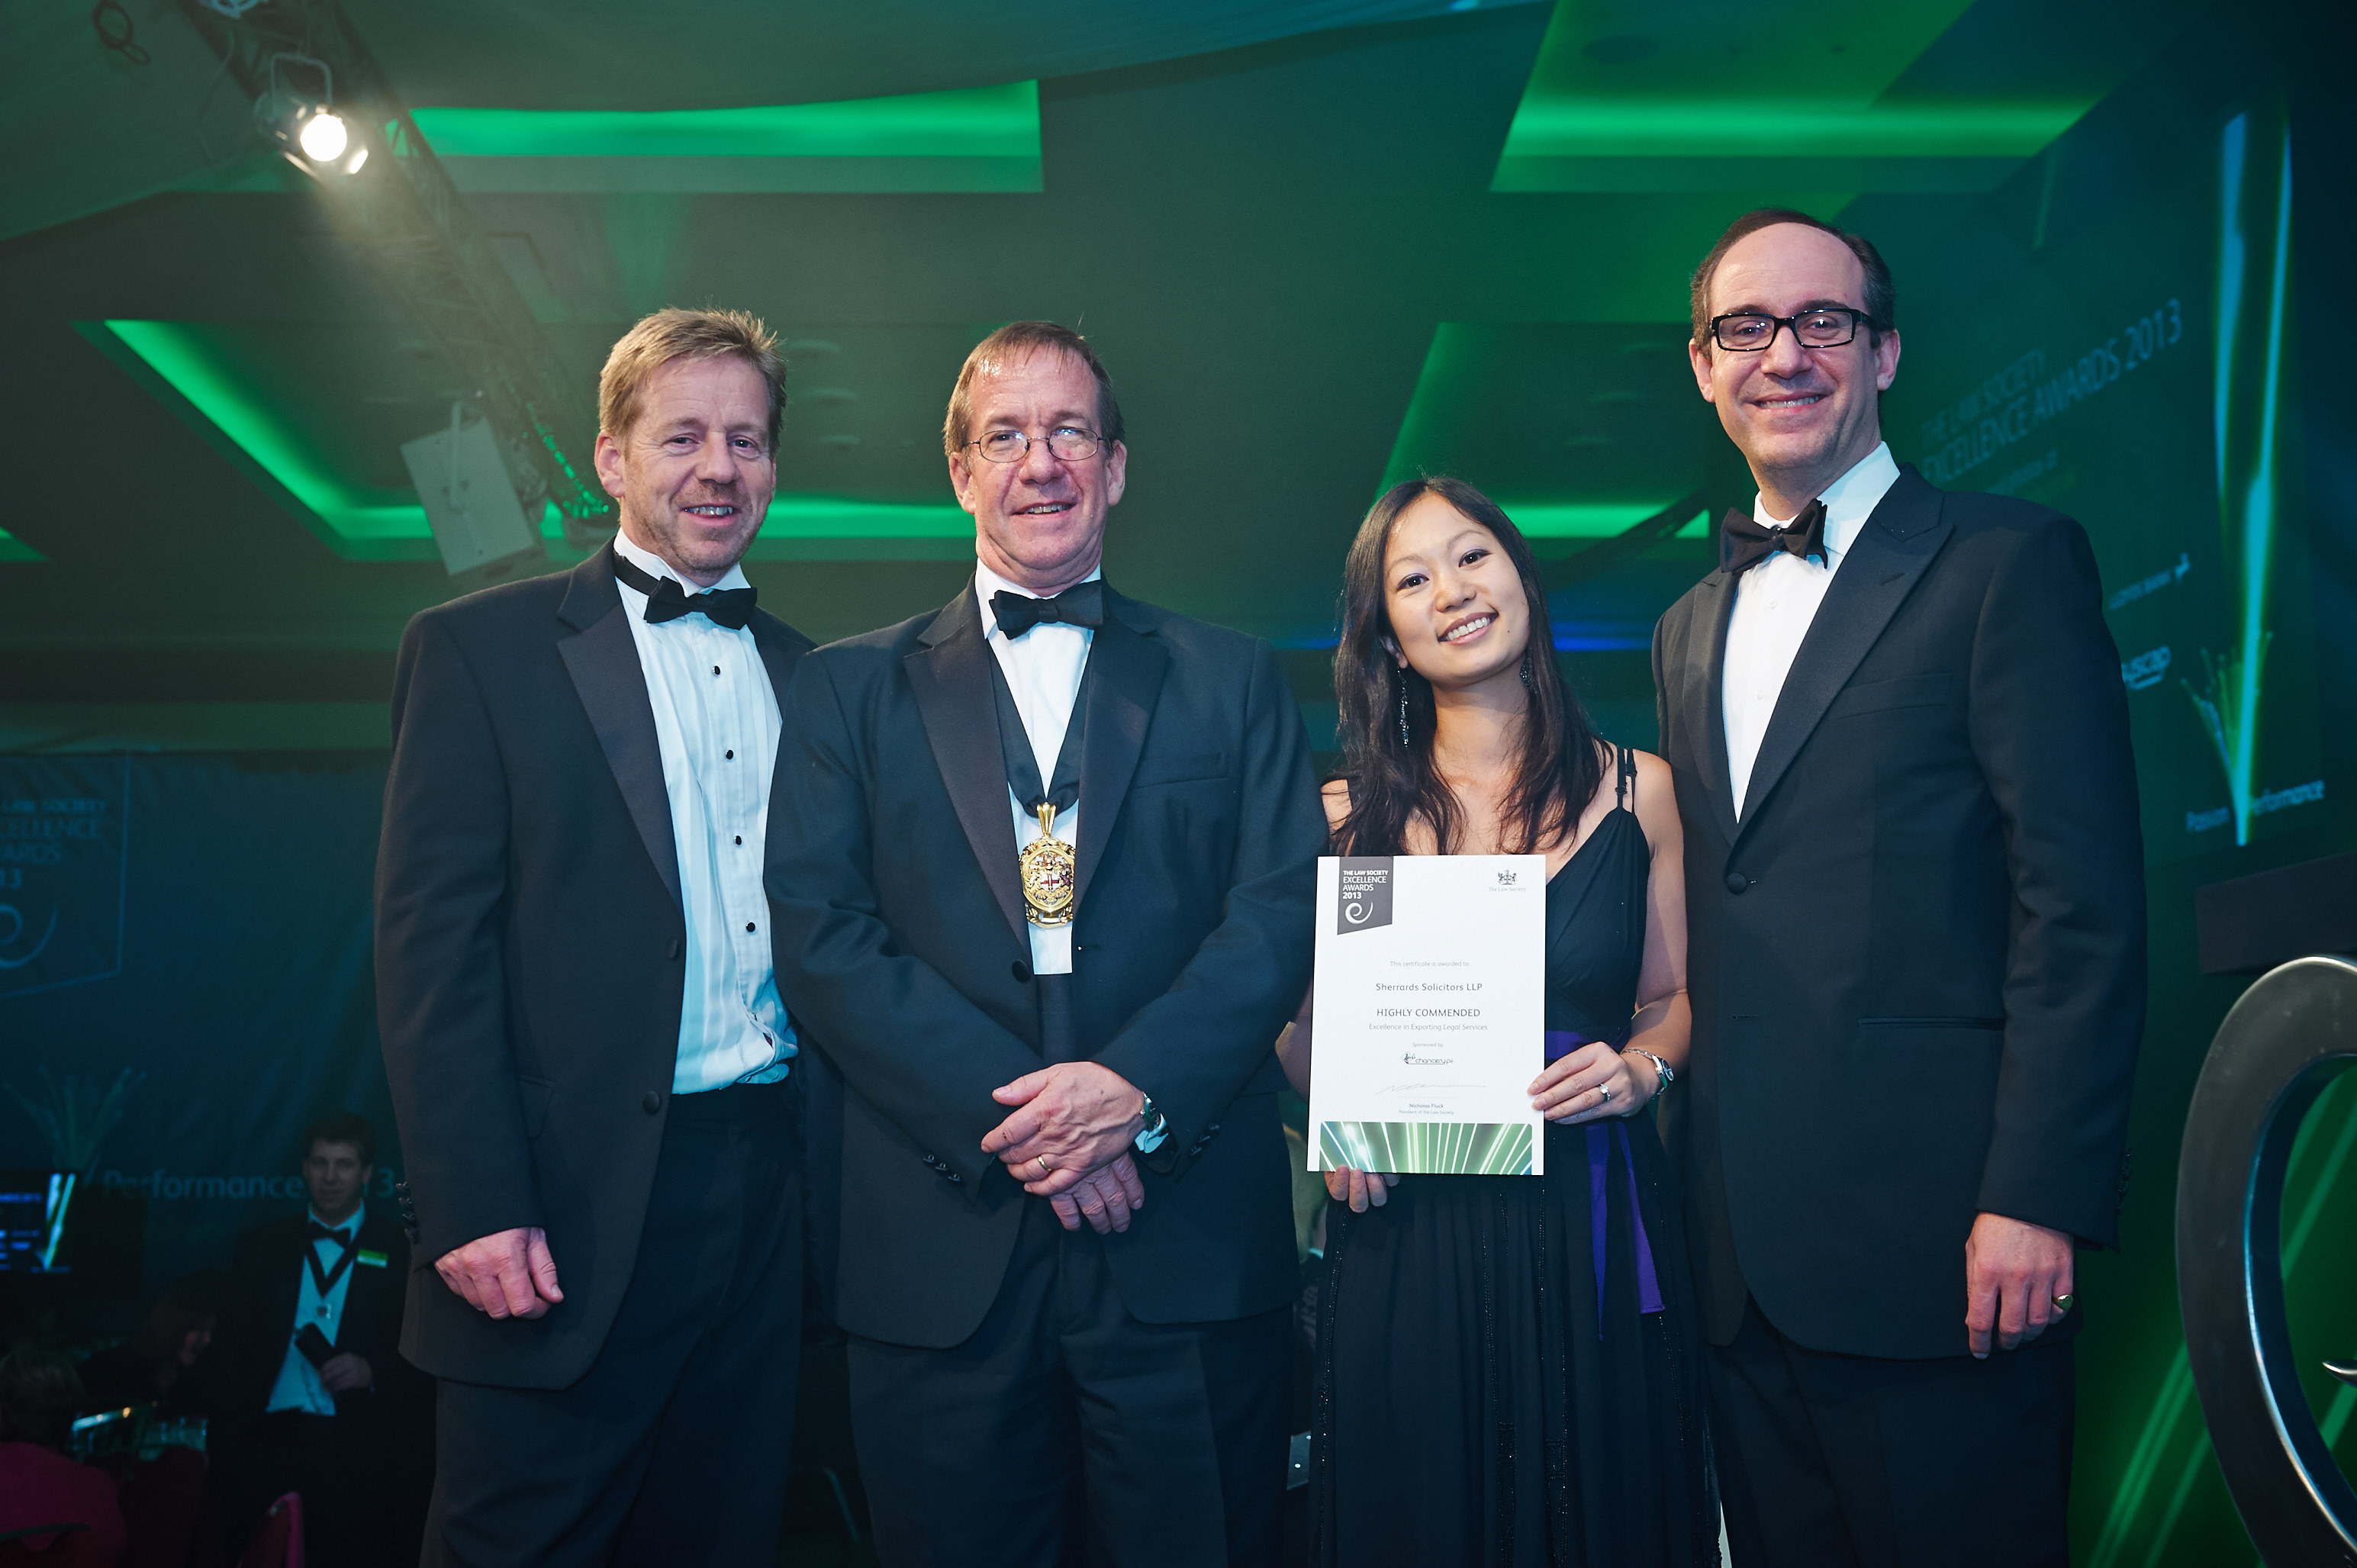 Sherrards Solicitors receive the Highly Acclaimed accolade in the international category at The Law Society Excellence Awards